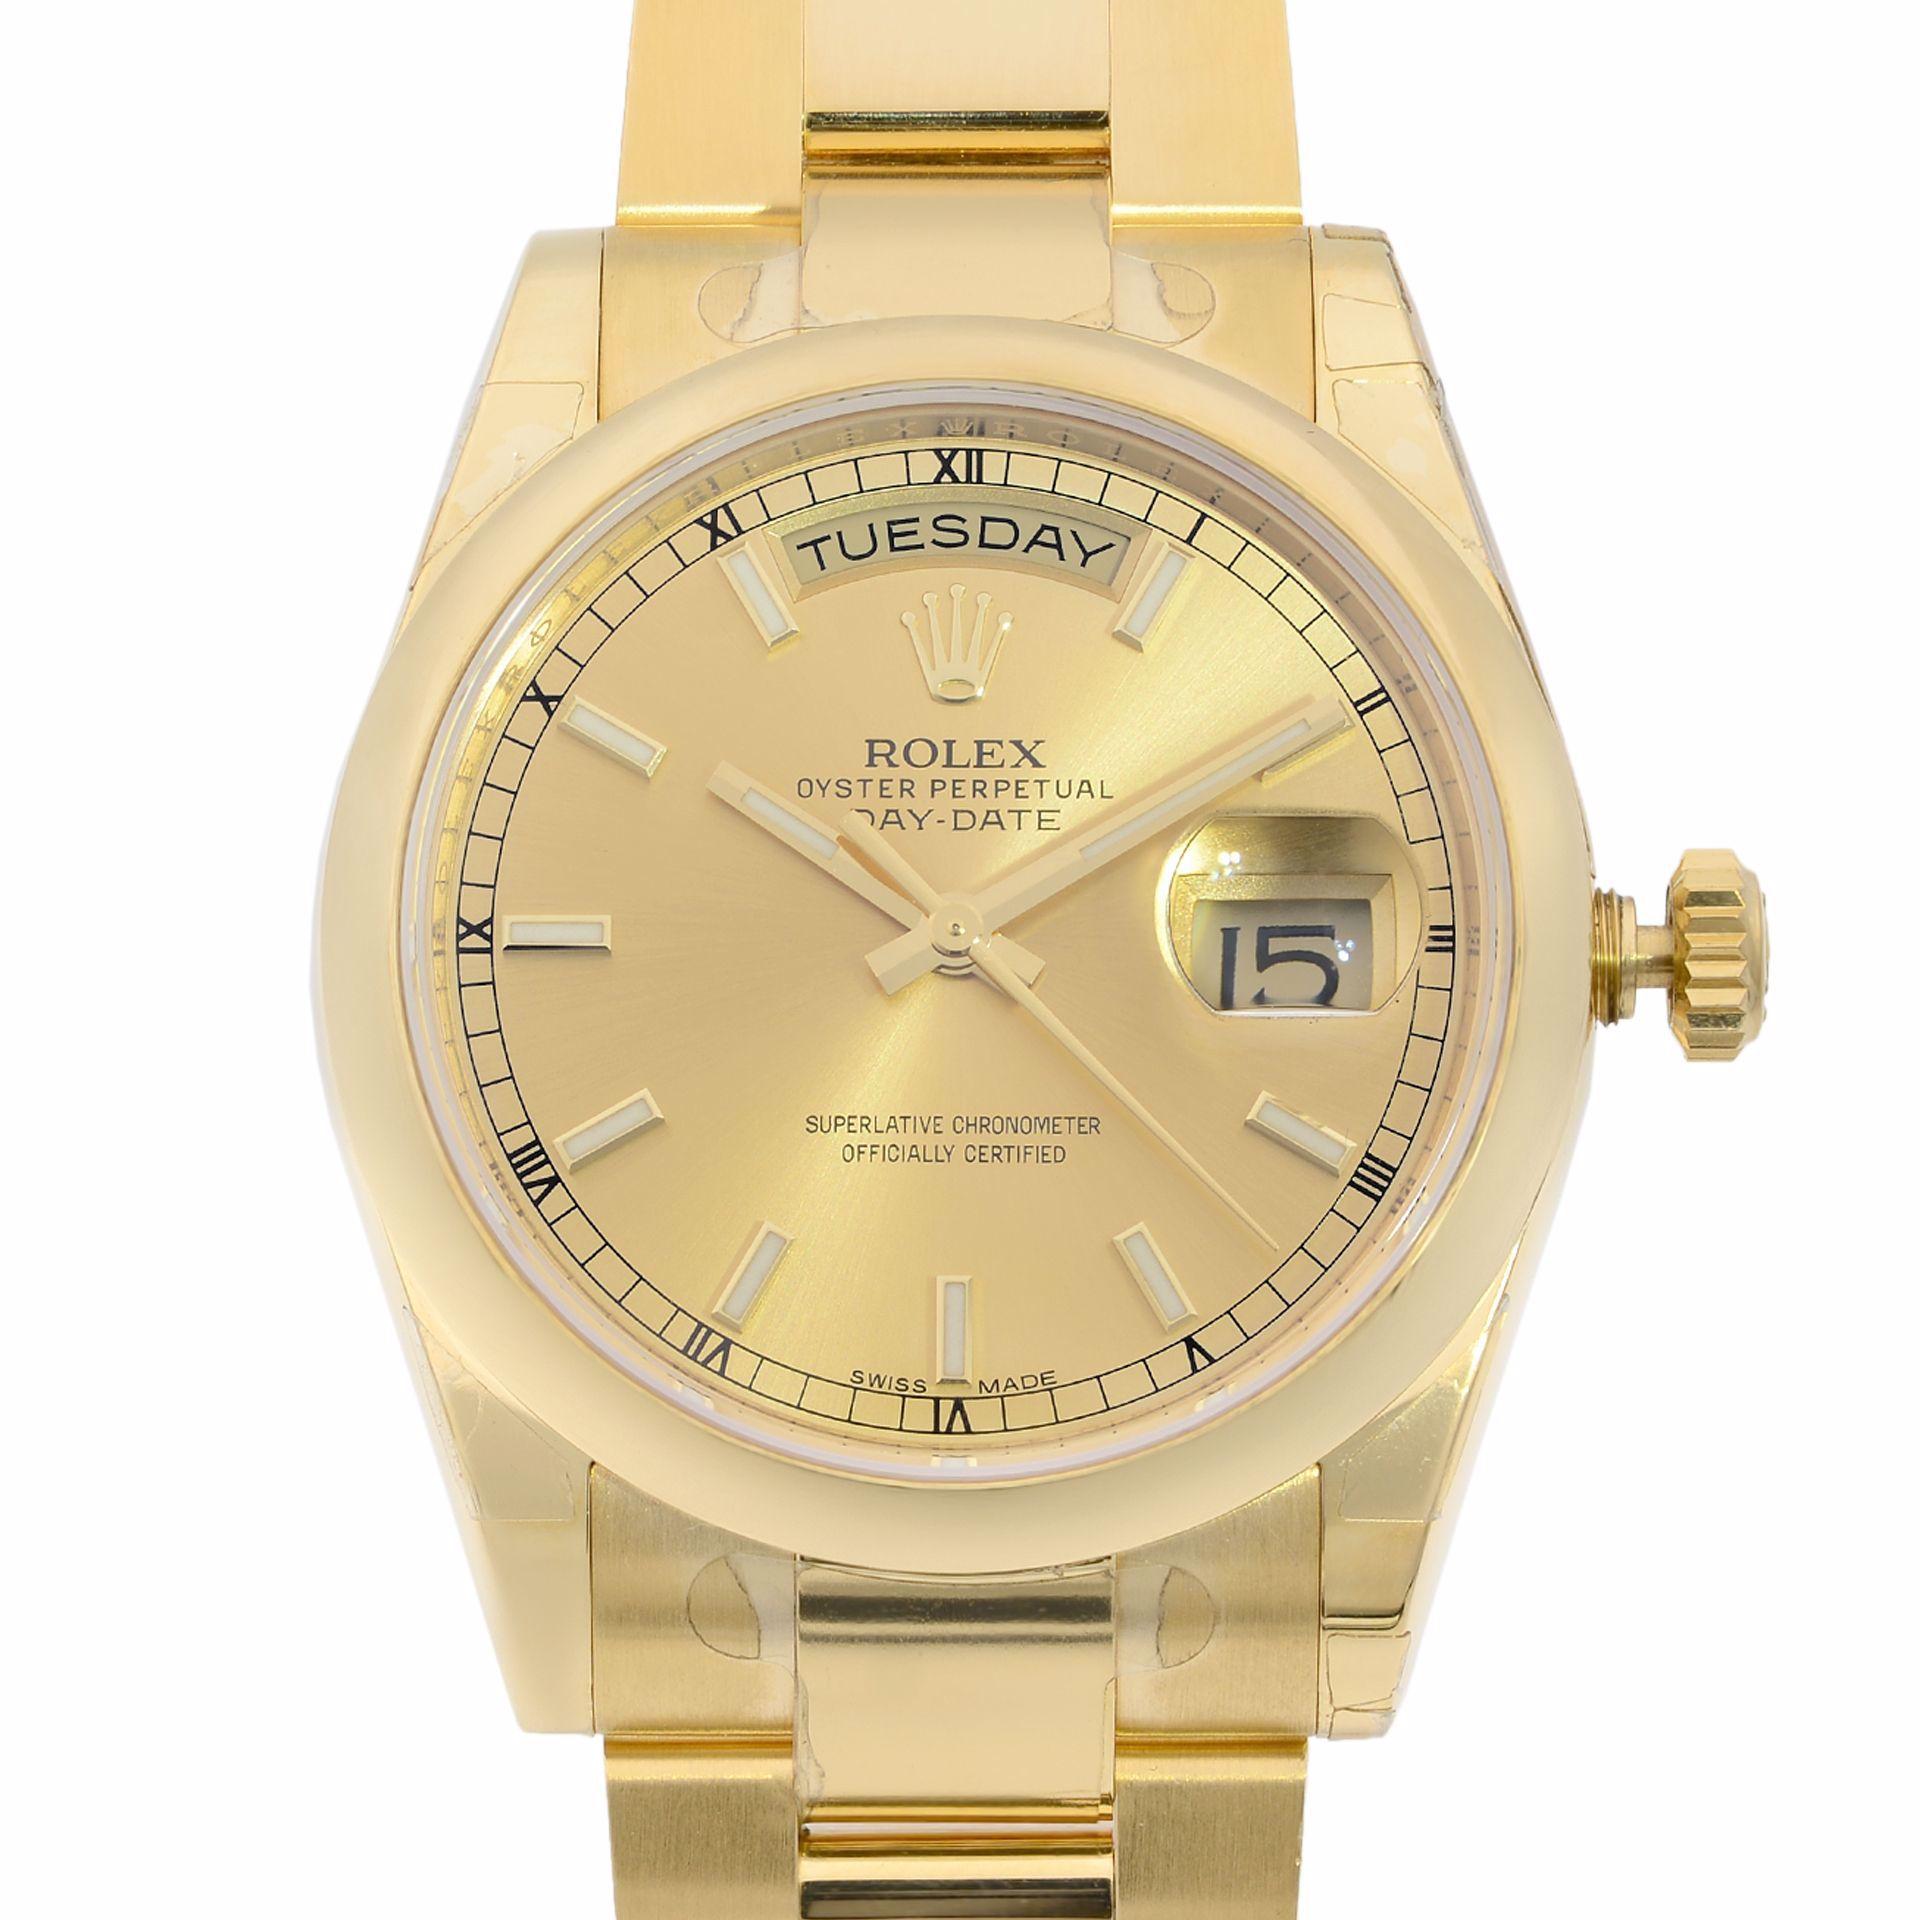 This brand new Rolex Day-Date 118208-CSO is a beautiful men's timepiece that is powered by a mechanical (automatic) movement which is cased in a yellow gold case. It has a round shape face, day & date dial and has hand sticks style markers. It is